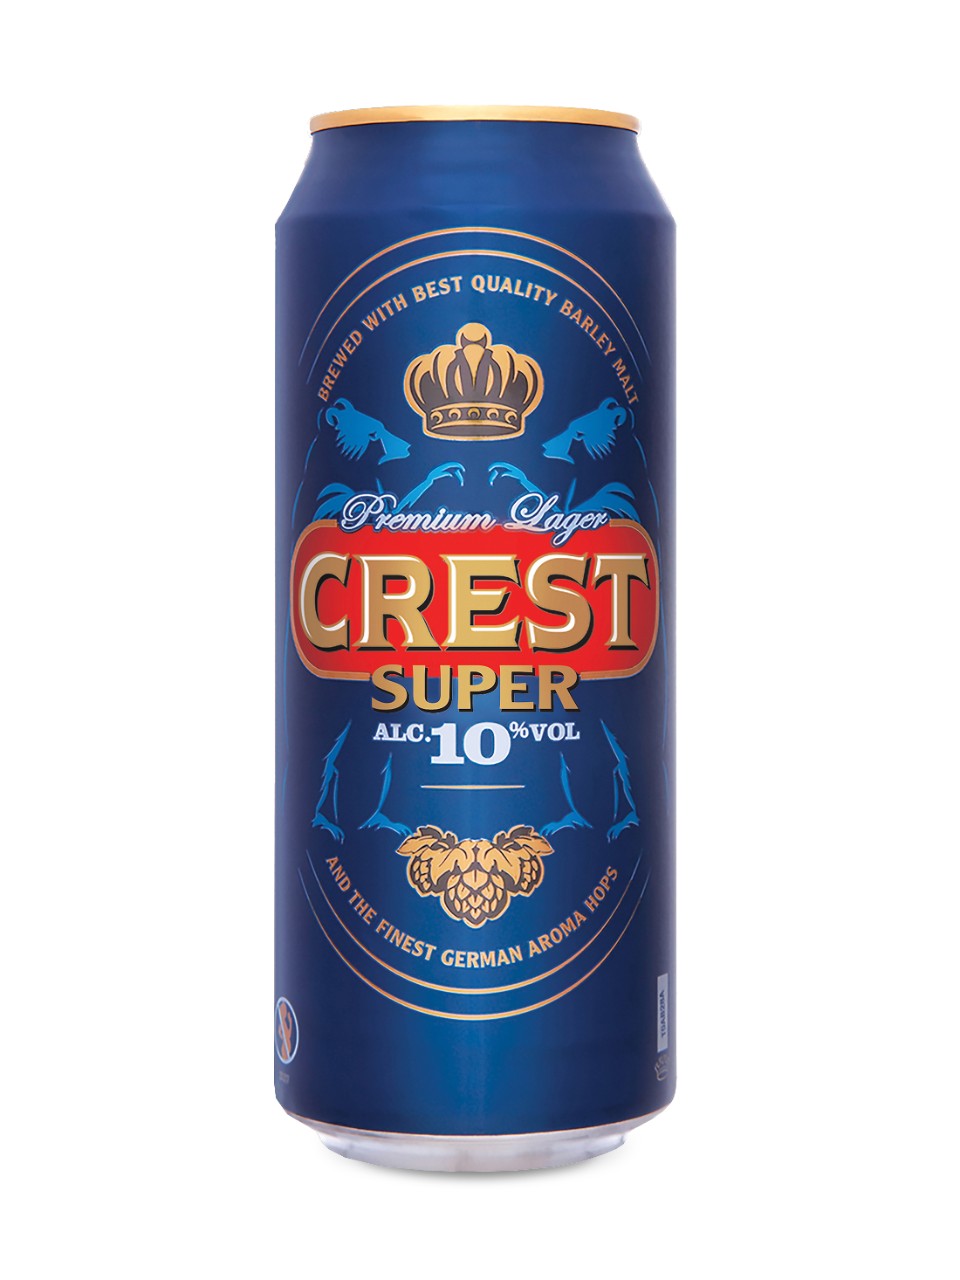 Crest Super Lager 500 mL can